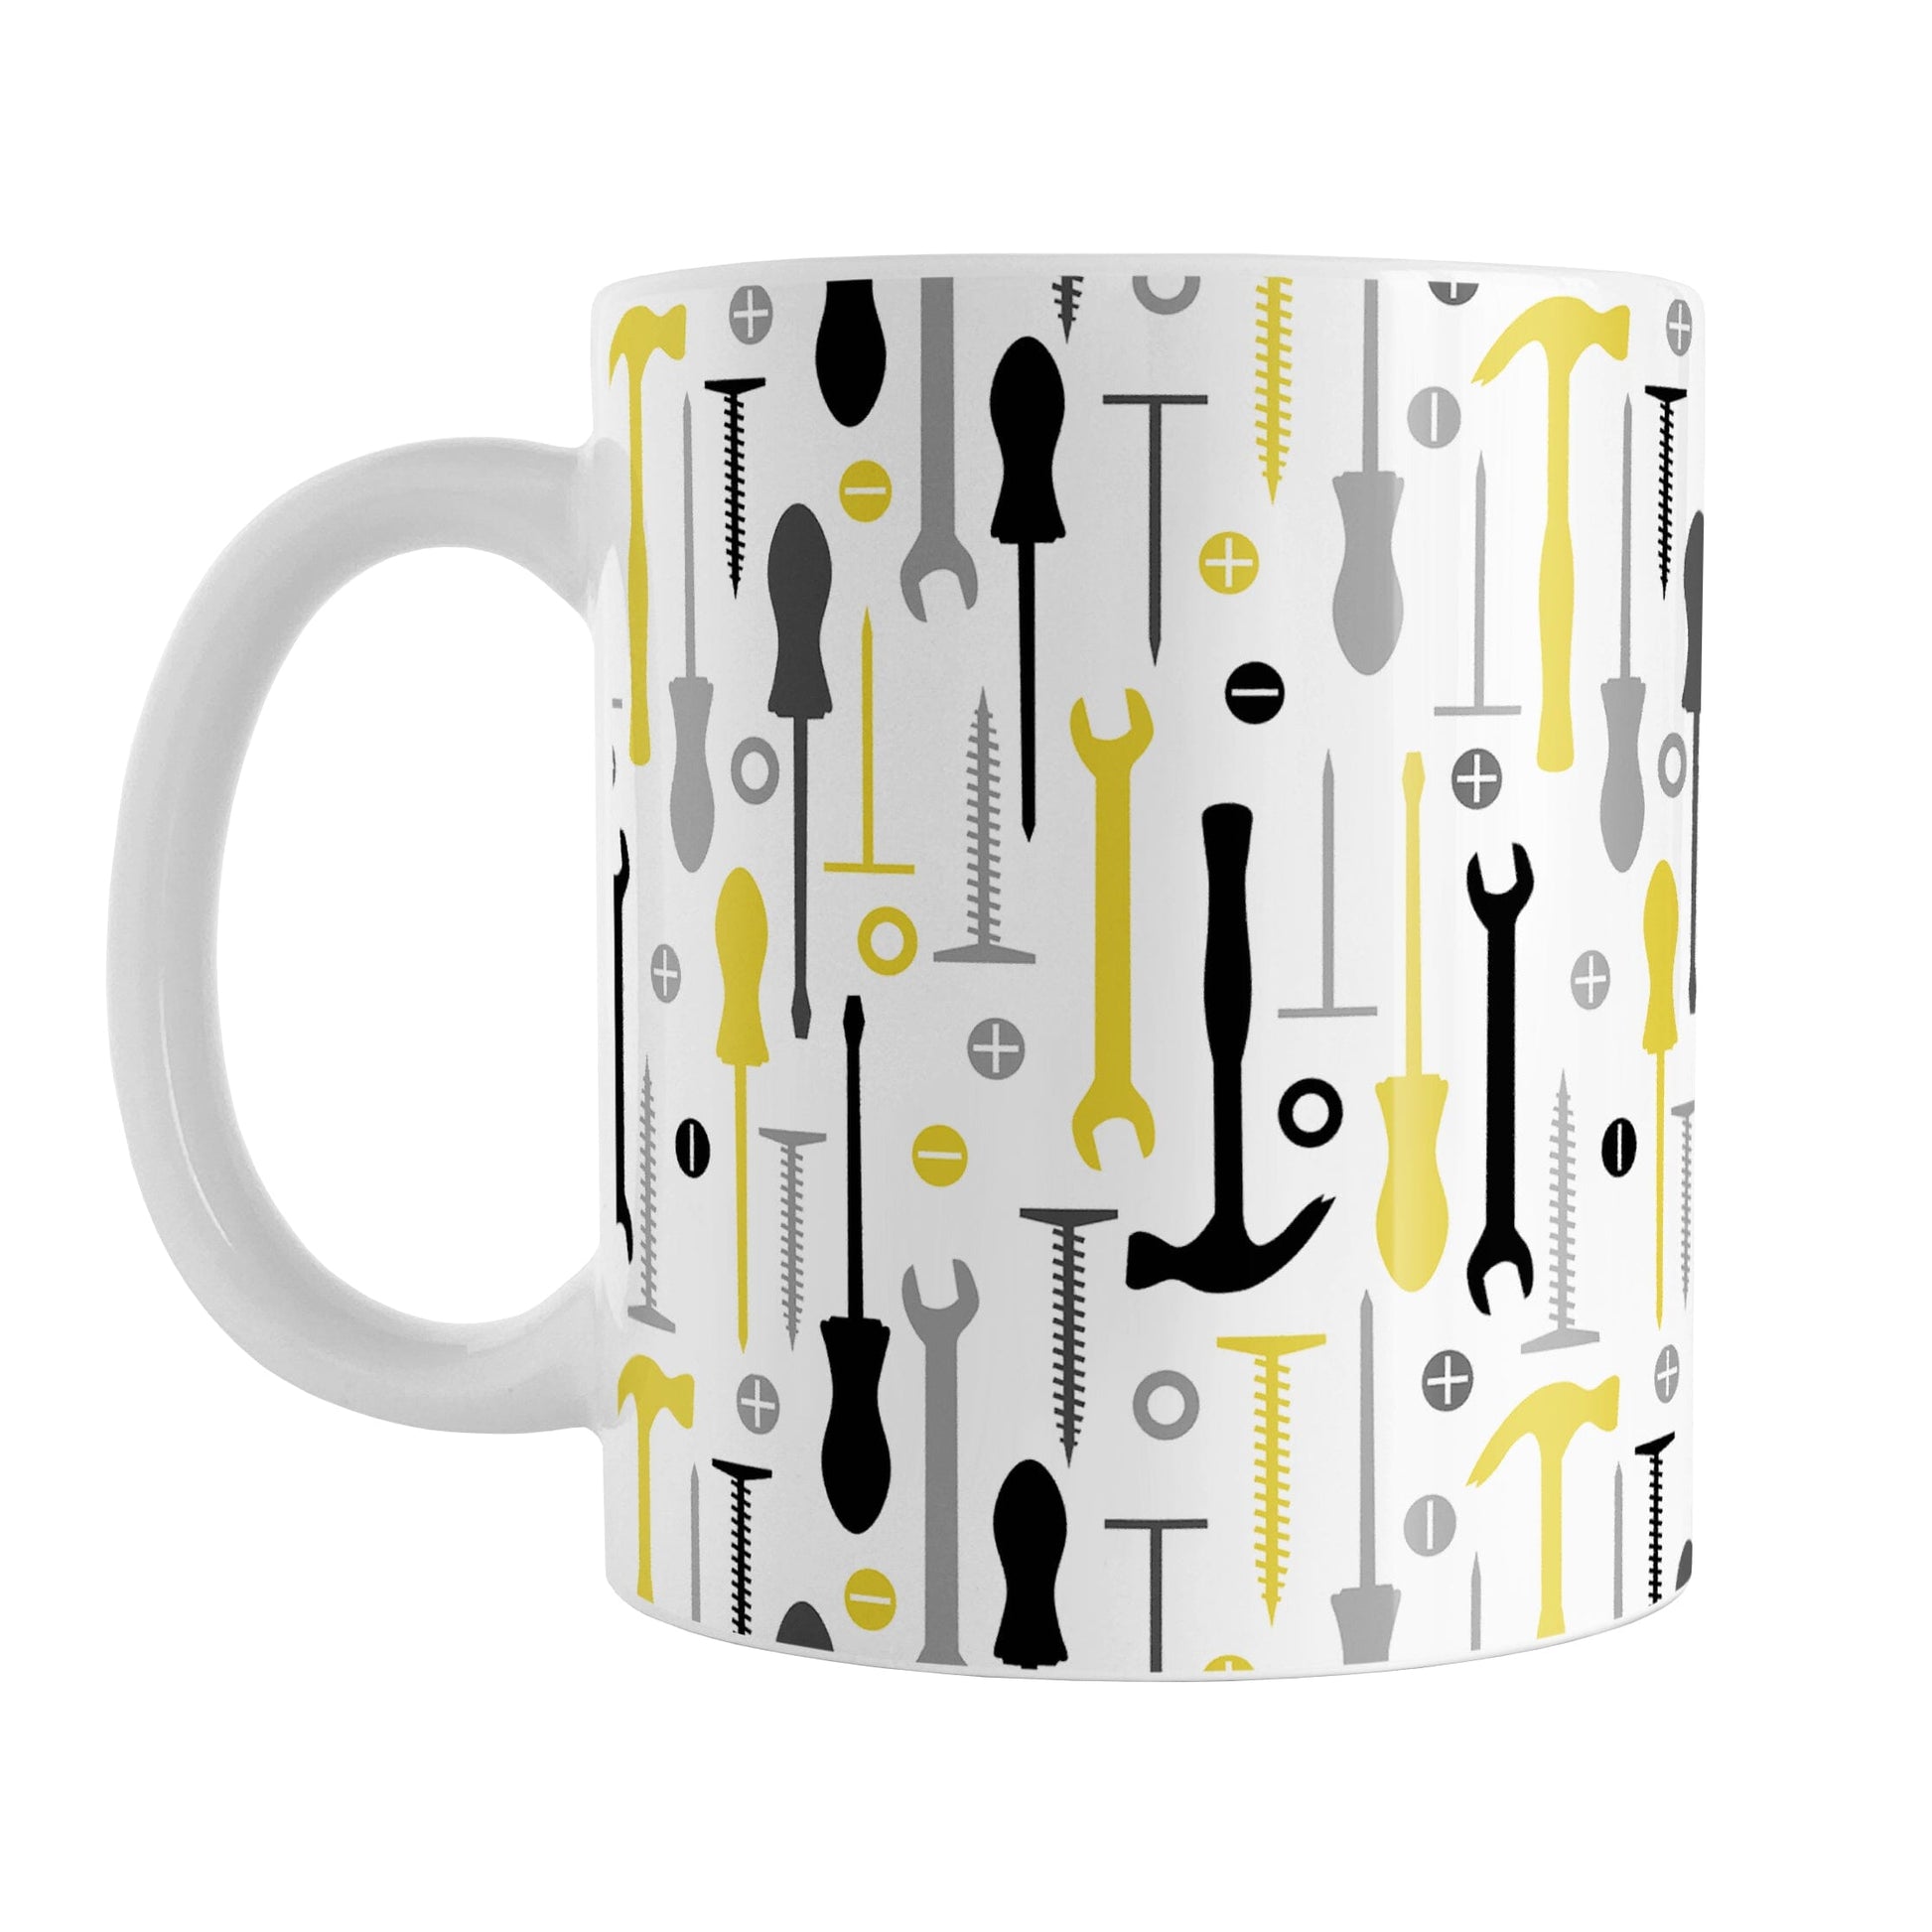 Yellow Tools Pattern Mug (11oz) at Amy's Coffee Mugs. A ceramic coffee mug with a modern style pattern of tools in yellow, black, and gray over white that wraps around the mug to the handle. Perfect for any handyman or contractor or anyone who loves working in their garage on their own. 